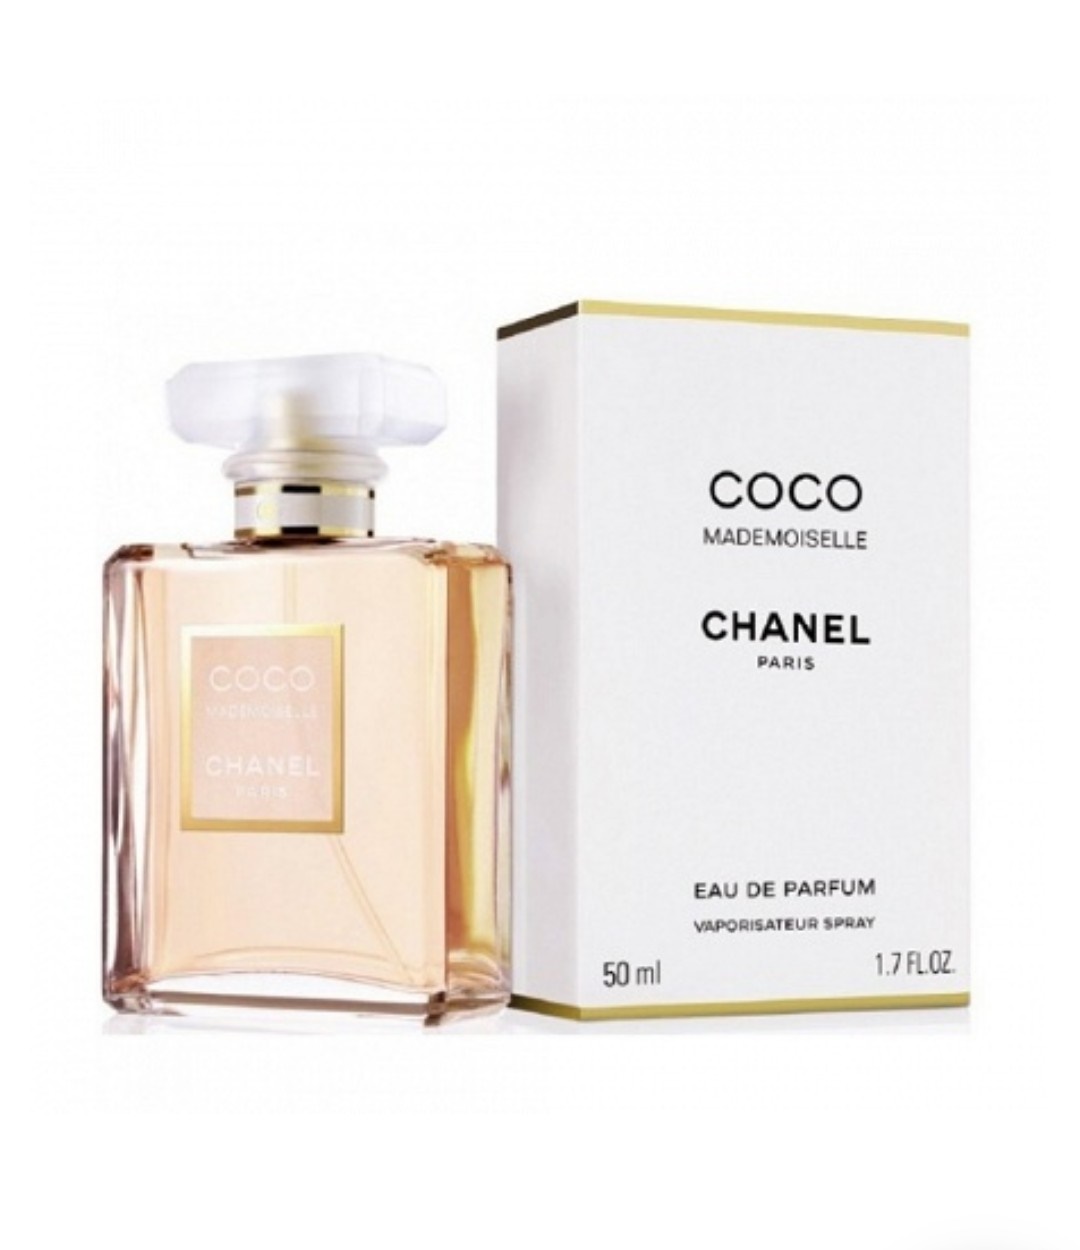 Coco Mademoiselle Chanel Perfume 100 Ml Spray Woman Counsel Perfume Perfumes Jewelery Accessories At Reduced Prices For Your End Of Year Parties